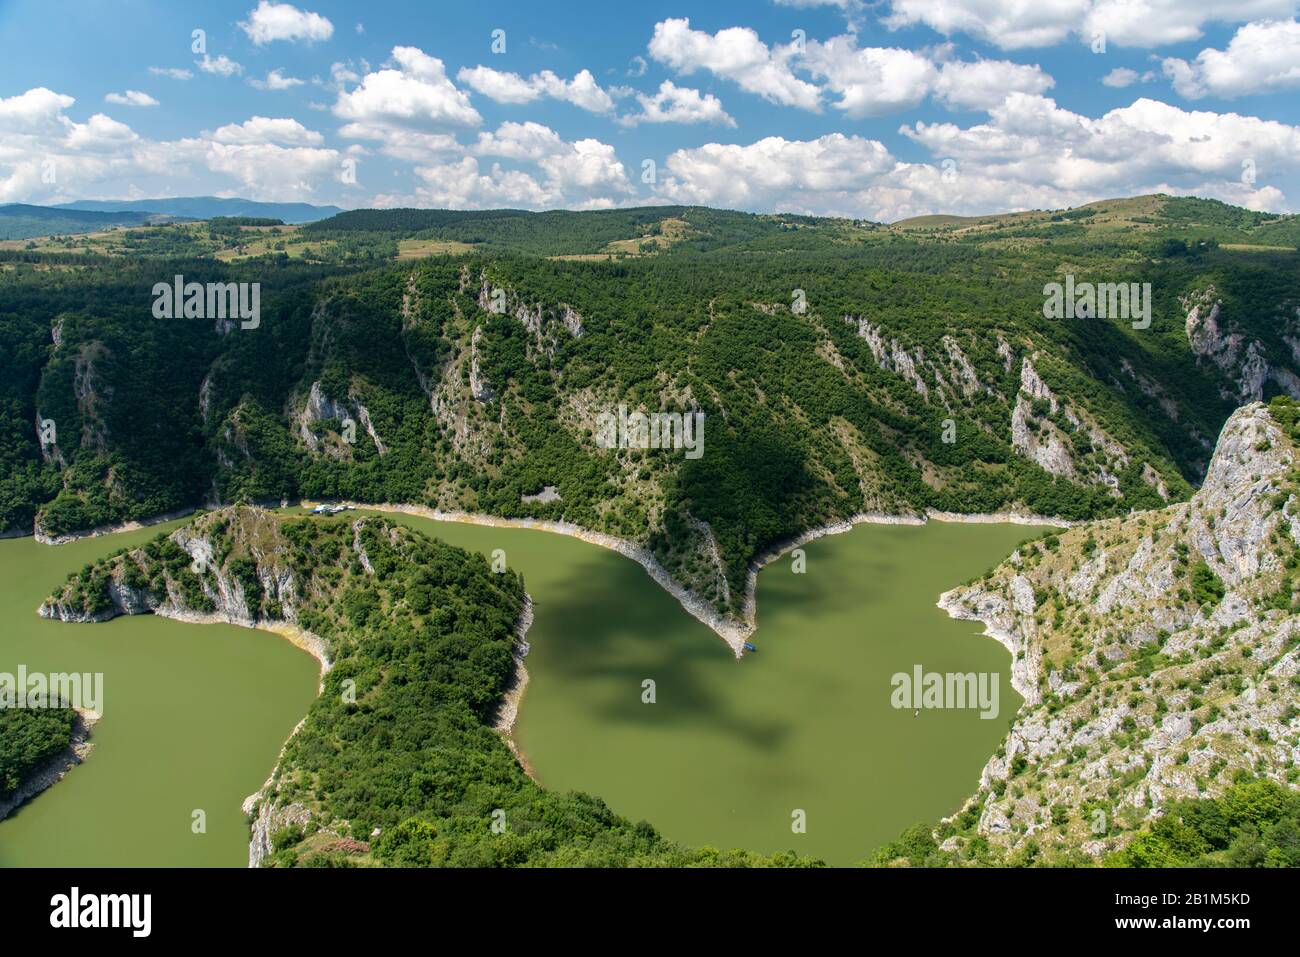 Canyon Of Uvac River With Meanders Nature Reserve Uvac, Serbia Photo - Alamy